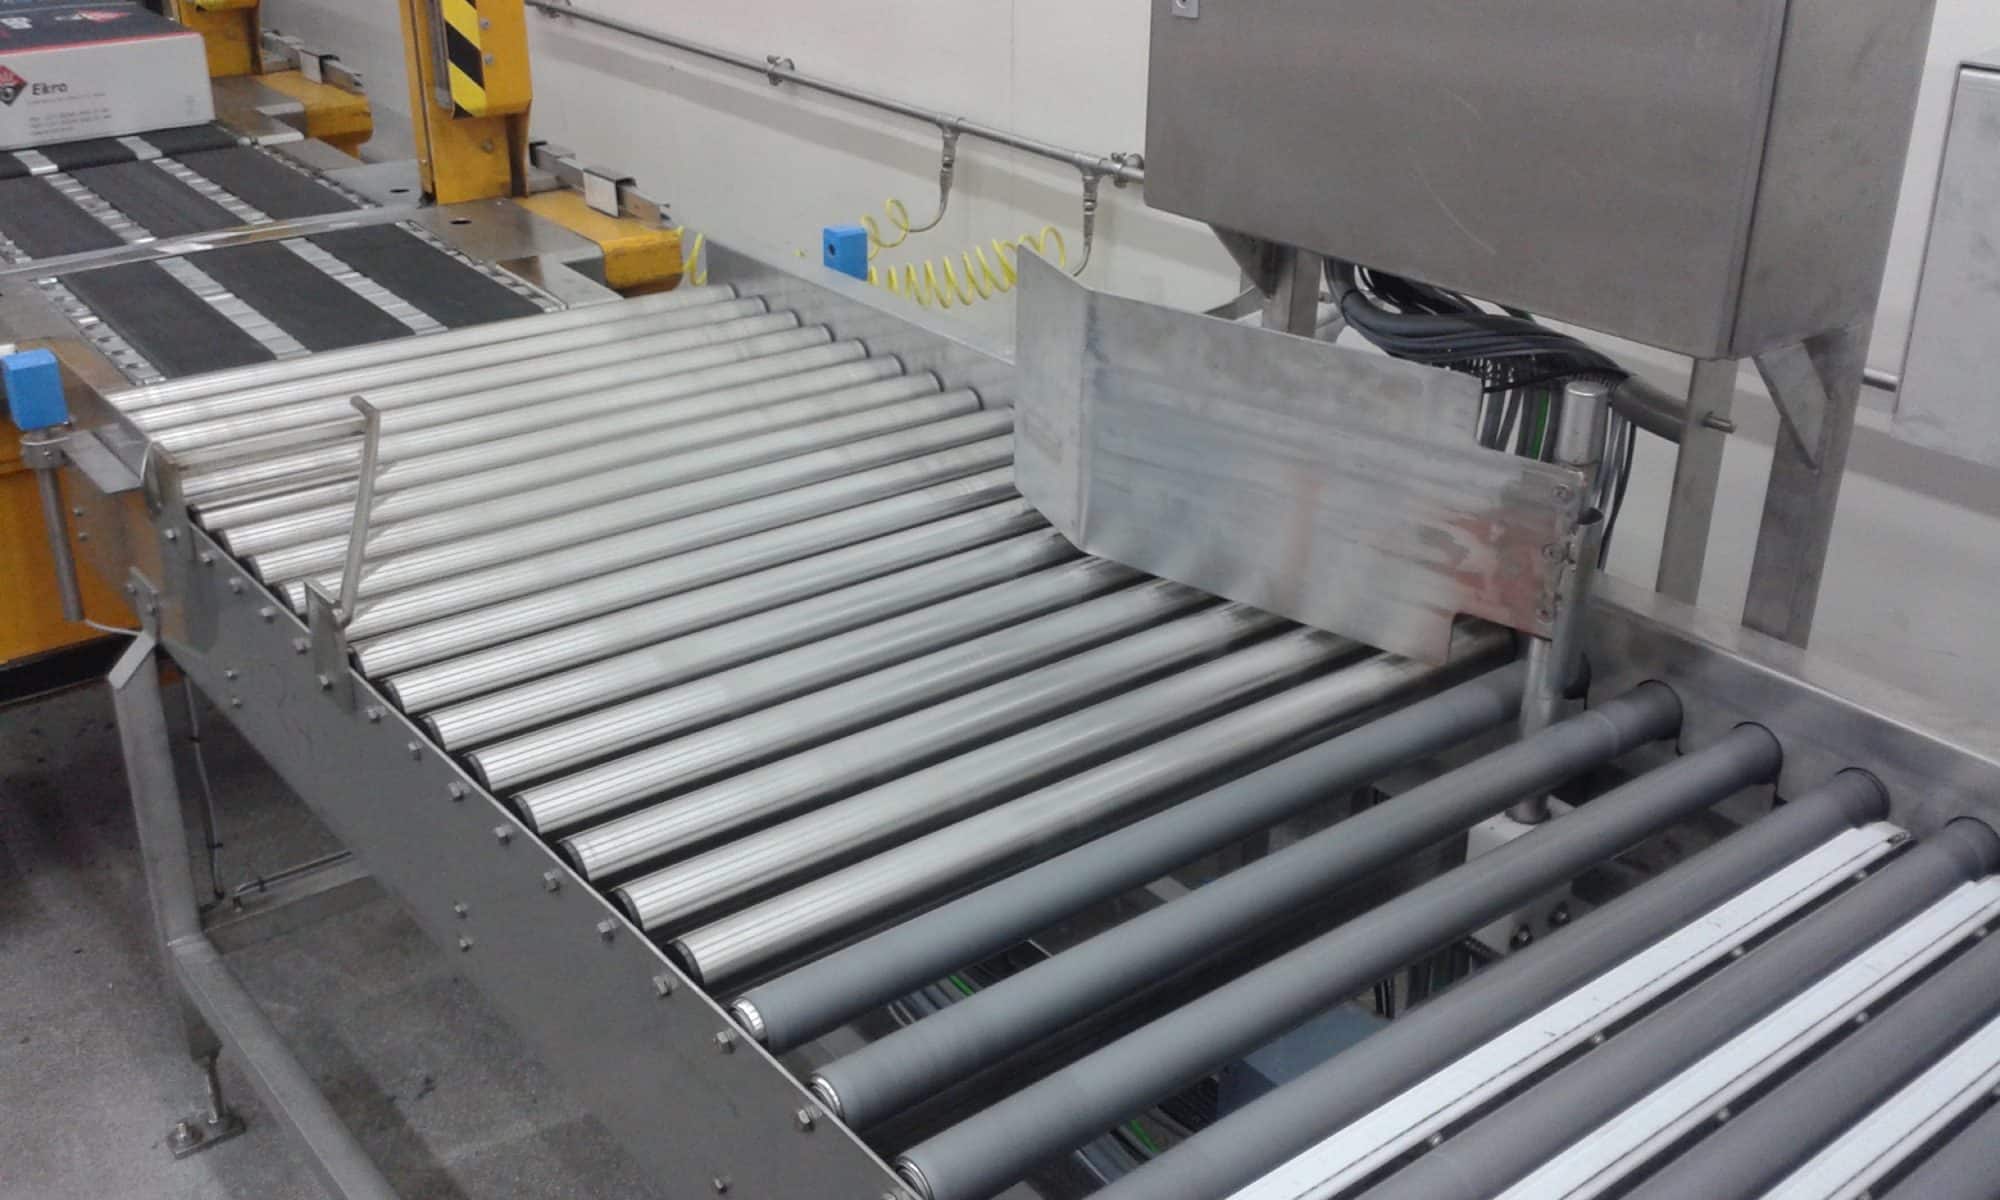 A close-up of a roller conveyor system, one of the most popular products of Easy Conveyors.